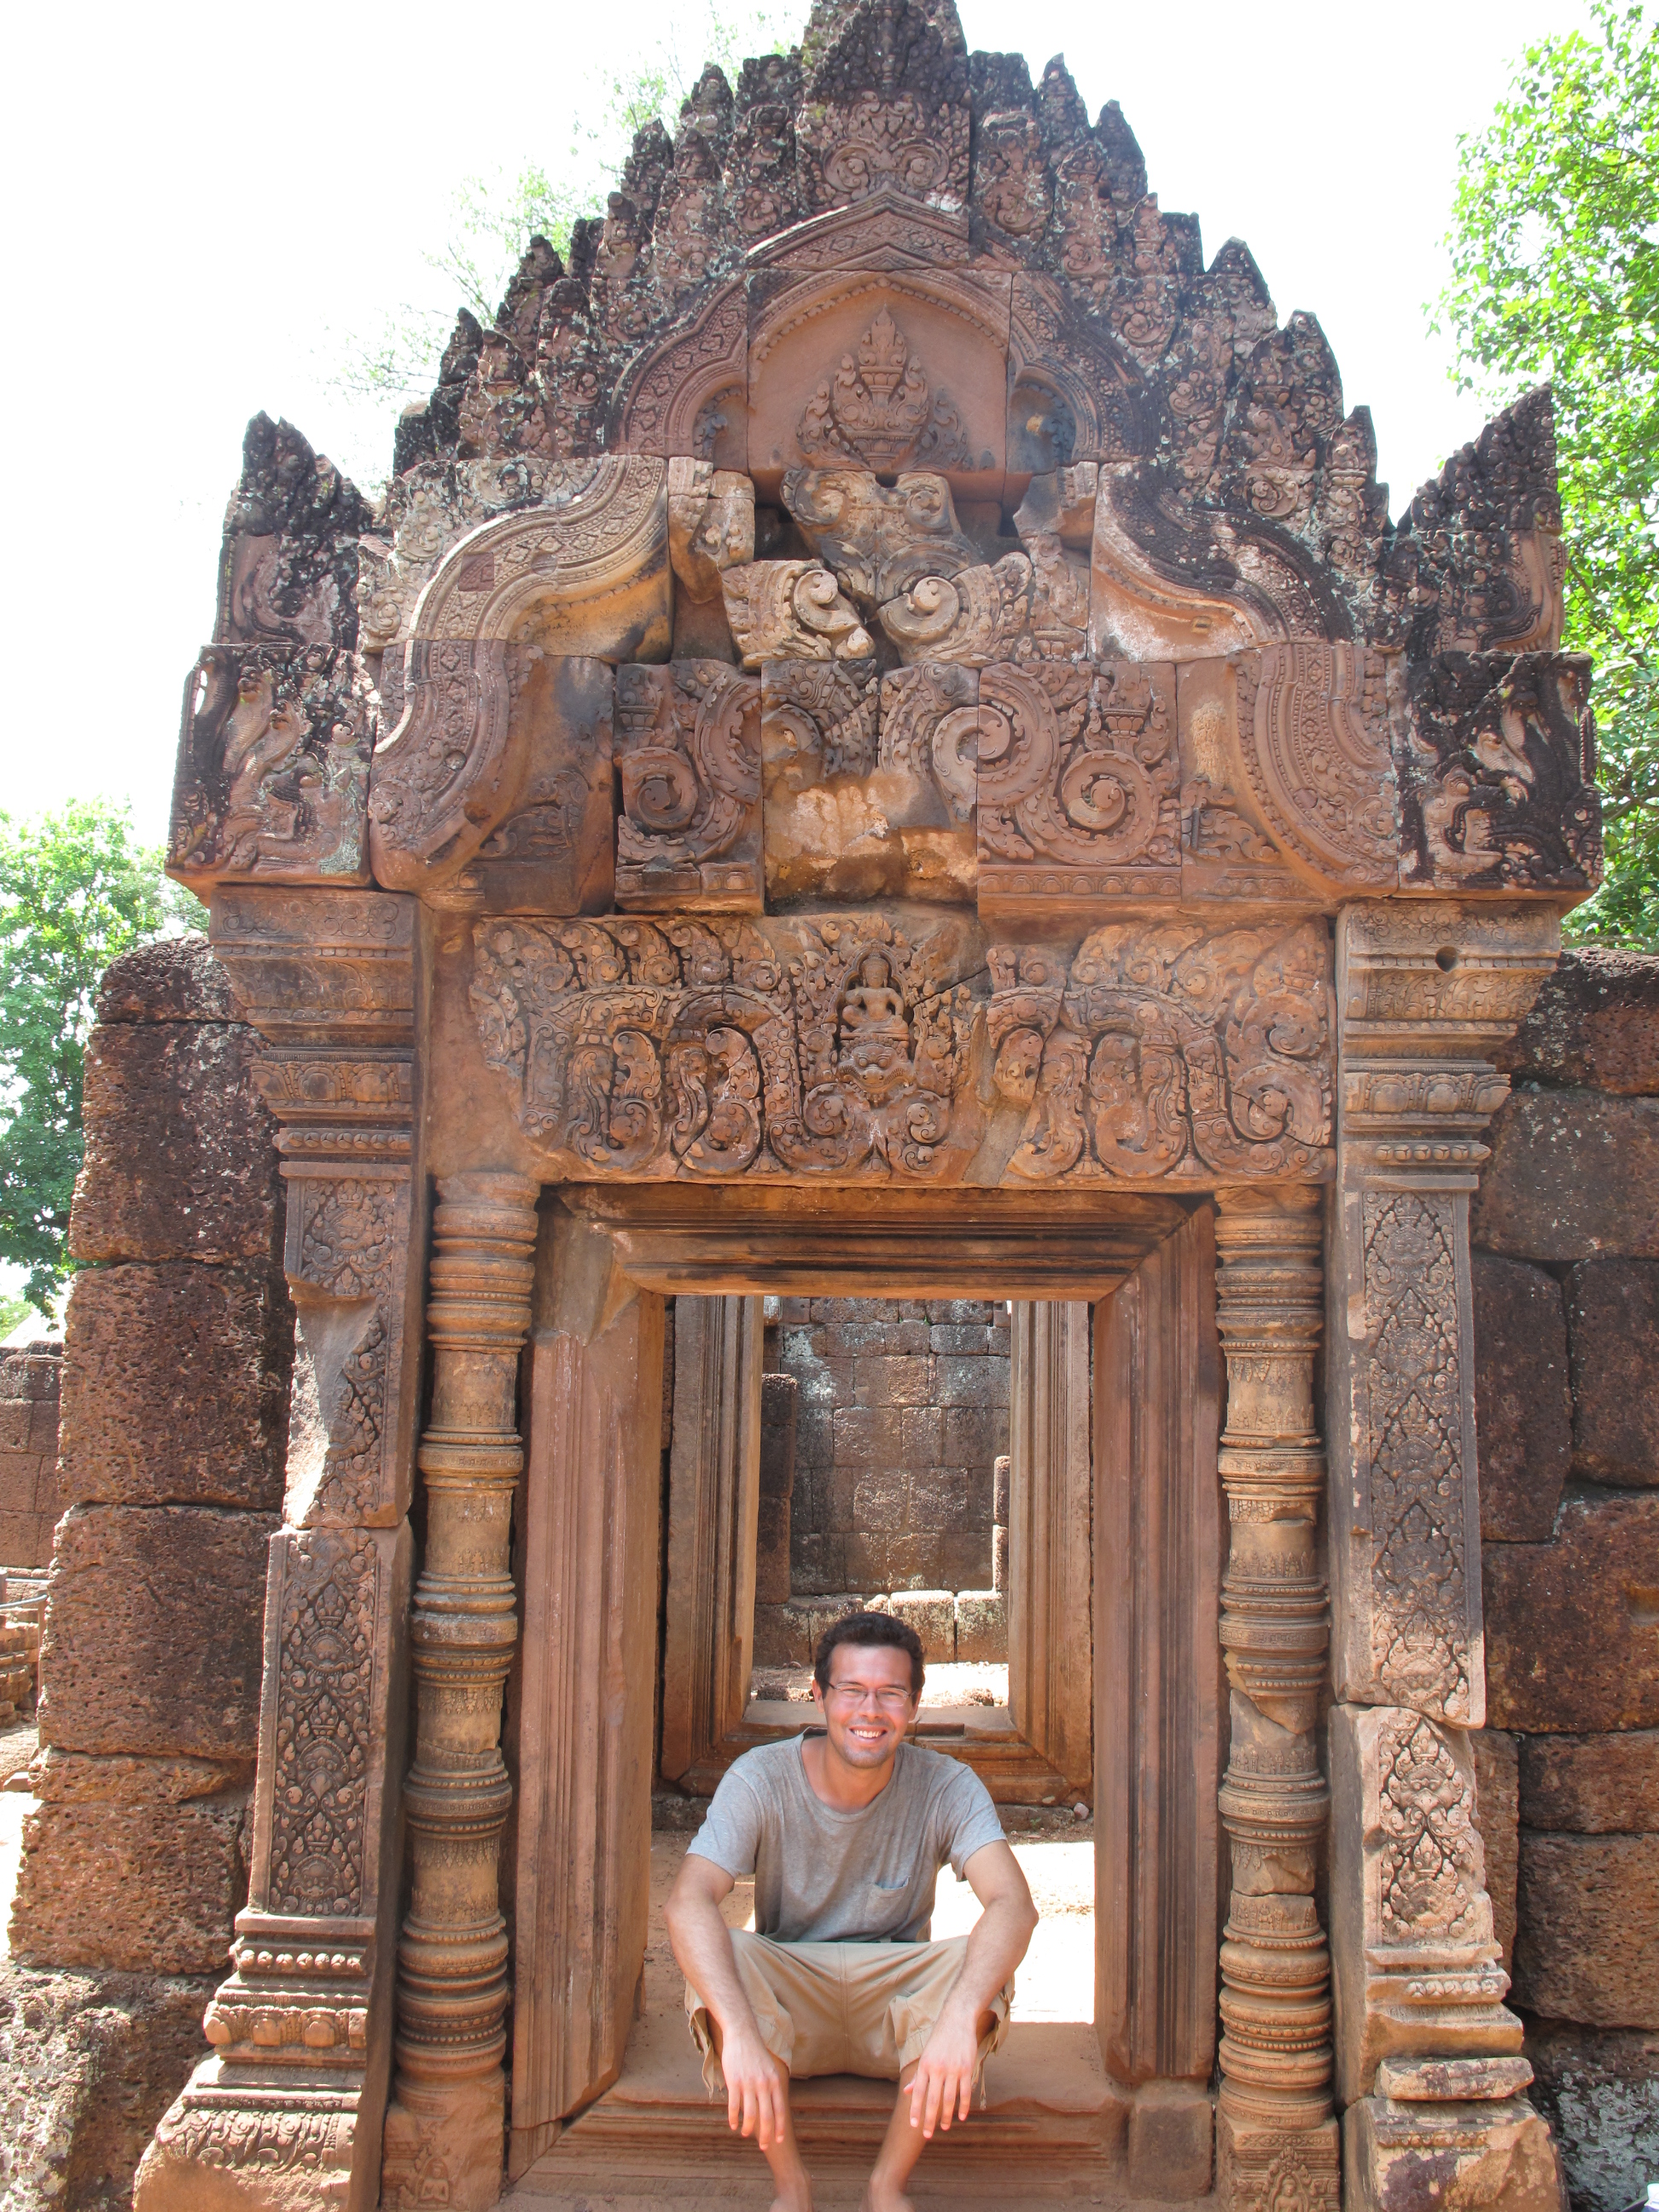 This is a picture of me in Cambodia during my around the world trip.